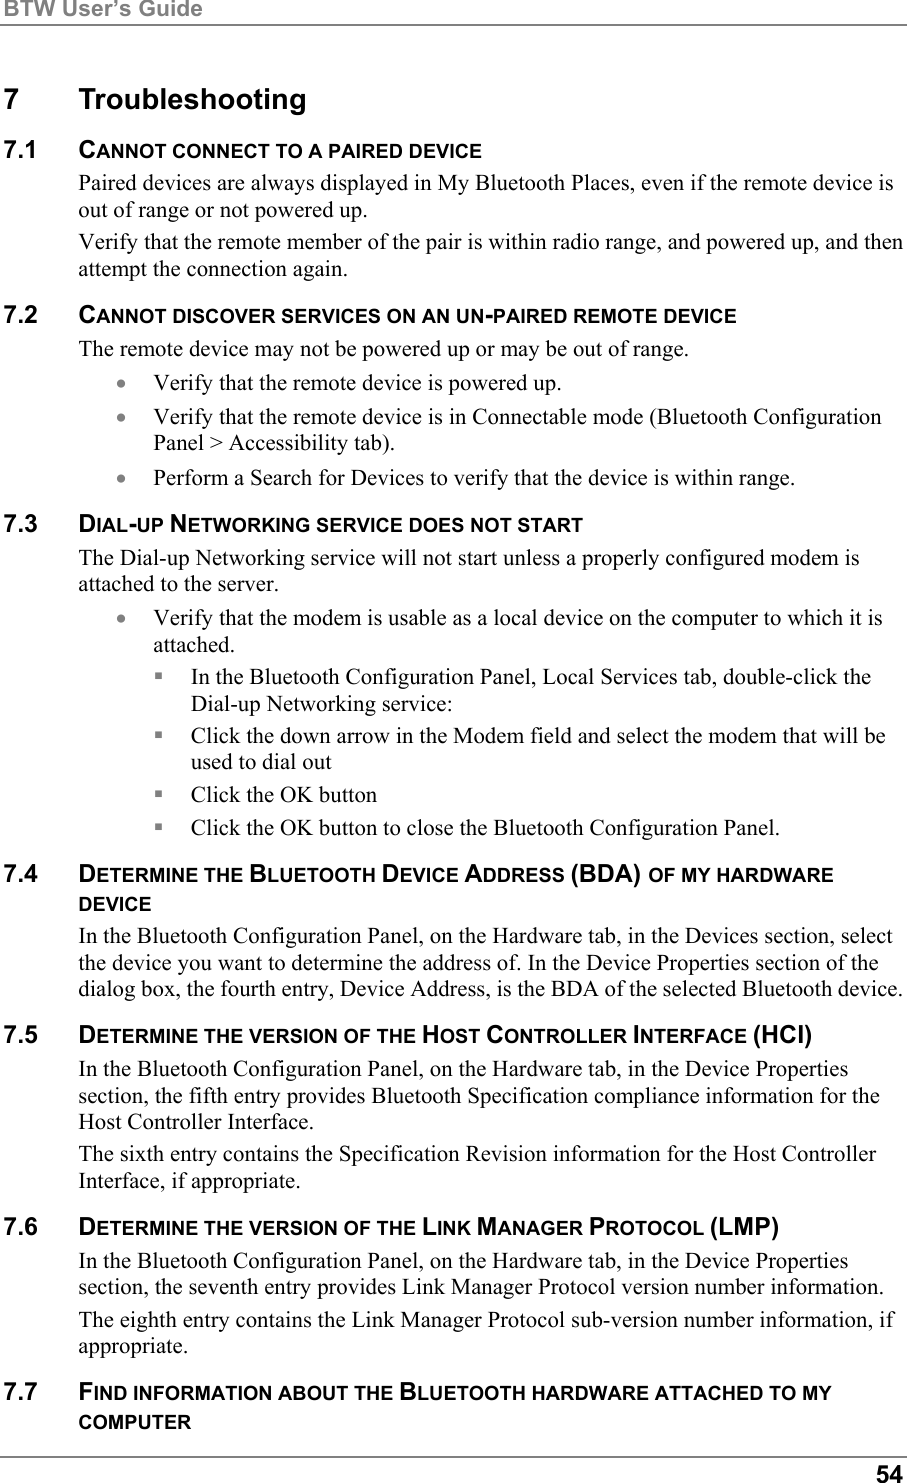 BTW User’s Guide547 Troubleshooting7.1 CANNOT CONNECT TO A PAIRED DEVICEPaired devices are always displayed in My Bluetooth Places, even if the remote device isout of range or not powered up.Verify that the remote member of the pair is within radio range, and powered up, and thenattempt the connection again.7.2 CANNOT DISCOVER SERVICES ON AN UN-PAIRED REMOTE DEVICEThe remote device may not be powered up or may be out of range.• Verify that the remote device is powered up.• Verify that the remote device is in Connectable mode (Bluetooth ConfigurationPanel &gt; Accessibility tab).• Perform a Search for Devices to verify that the device is within range.7.3 DIAL-UP NETWORKING SERVICE DOES NOT STARTThe Dial-up Networking service will not start unless a properly configured modem isattached to the server.• Verify that the modem is usable as a local device on the computer to which it isattached. In the Bluetooth Configuration Panel, Local Services tab, double-click theDial-up Networking service: Click the down arrow in the Modem field and select the modem that will beused to dial out Click the OK button Click the OK button to close the Bluetooth Configuration Panel.7.4 DETERMINE THE BLUETOOTH DEVICE ADDRESS (BDA) OF MY HARDWAREDEVICEIn the Bluetooth Configuration Panel, on the Hardware tab, in the Devices section, selectthe device you want to determine the address of. In the Device Properties section of thedialog box, the fourth entry, Device Address, is the BDA of the selected Bluetooth device.7.5 DETERMINE THE VERSION OF THE HOST CONTROLLER INTERFACE (HCI)In the Bluetooth Configuration Panel, on the Hardware tab, in the Device Propertiessection, the fifth entry provides Bluetooth Specification compliance information for theHost Controller Interface.The sixth entry contains the Specification Revision information for the Host ControllerInterface, if appropriate.7.6 DETERMINE THE VERSION OF THE LINK MANAGER PROTOCOL (LMP)In the Bluetooth Configuration Panel, on the Hardware tab, in the Device Propertiessection, the seventh entry provides Link Manager Protocol version number information.The eighth entry contains the Link Manager Protocol sub-version number information, ifappropriate.7.7 FIND INFORMATION ABOUT THE BLUETOOTH HARDWARE ATTACHED TO MYCOMPUTER